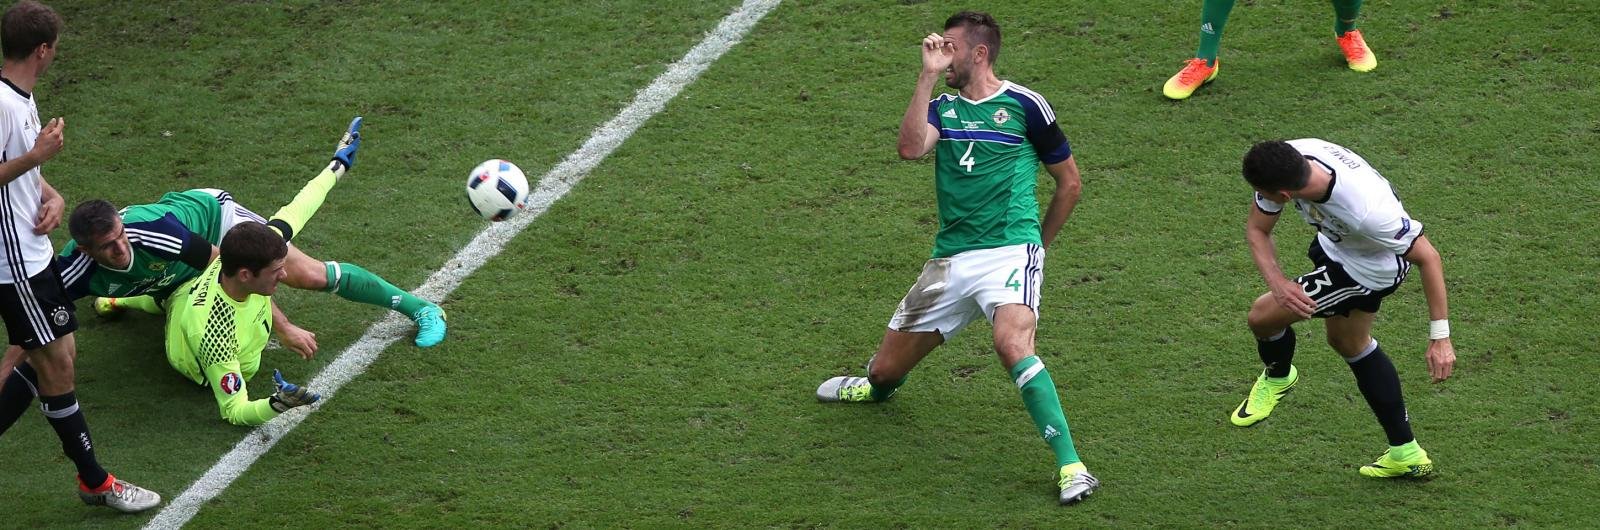 Northern Ireland 0-1 Germany: EURO 2016 Group C Report